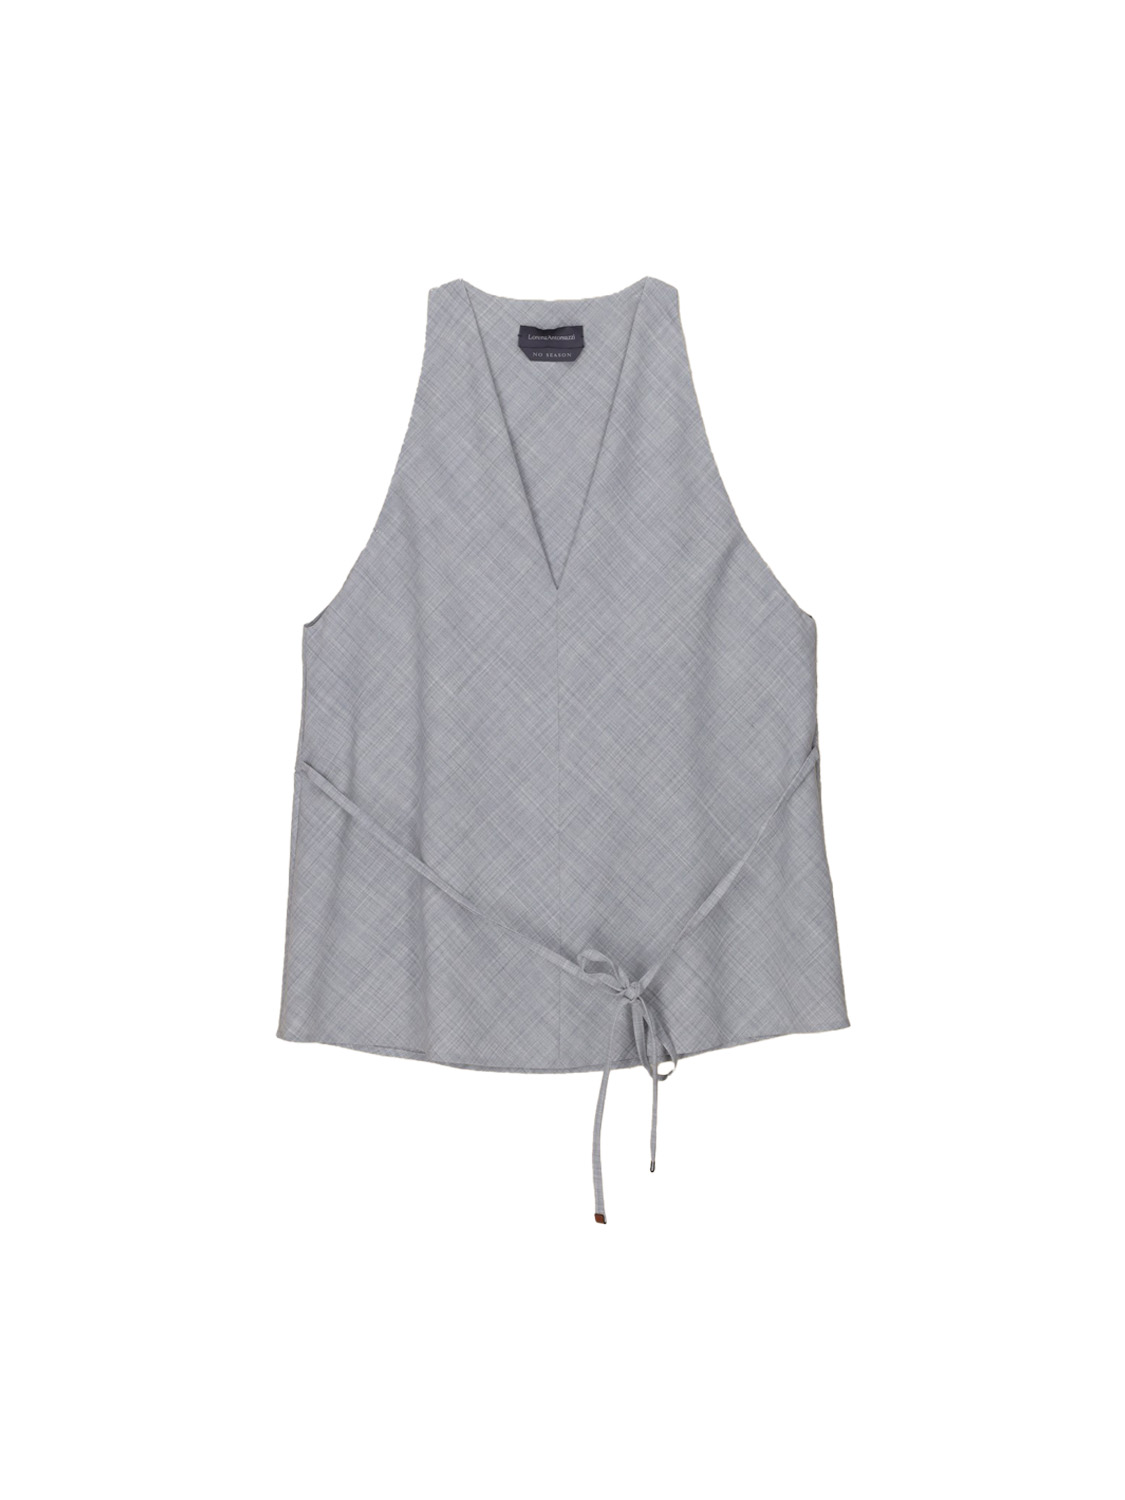 Stretchy virgin wool blouse with tie detail 